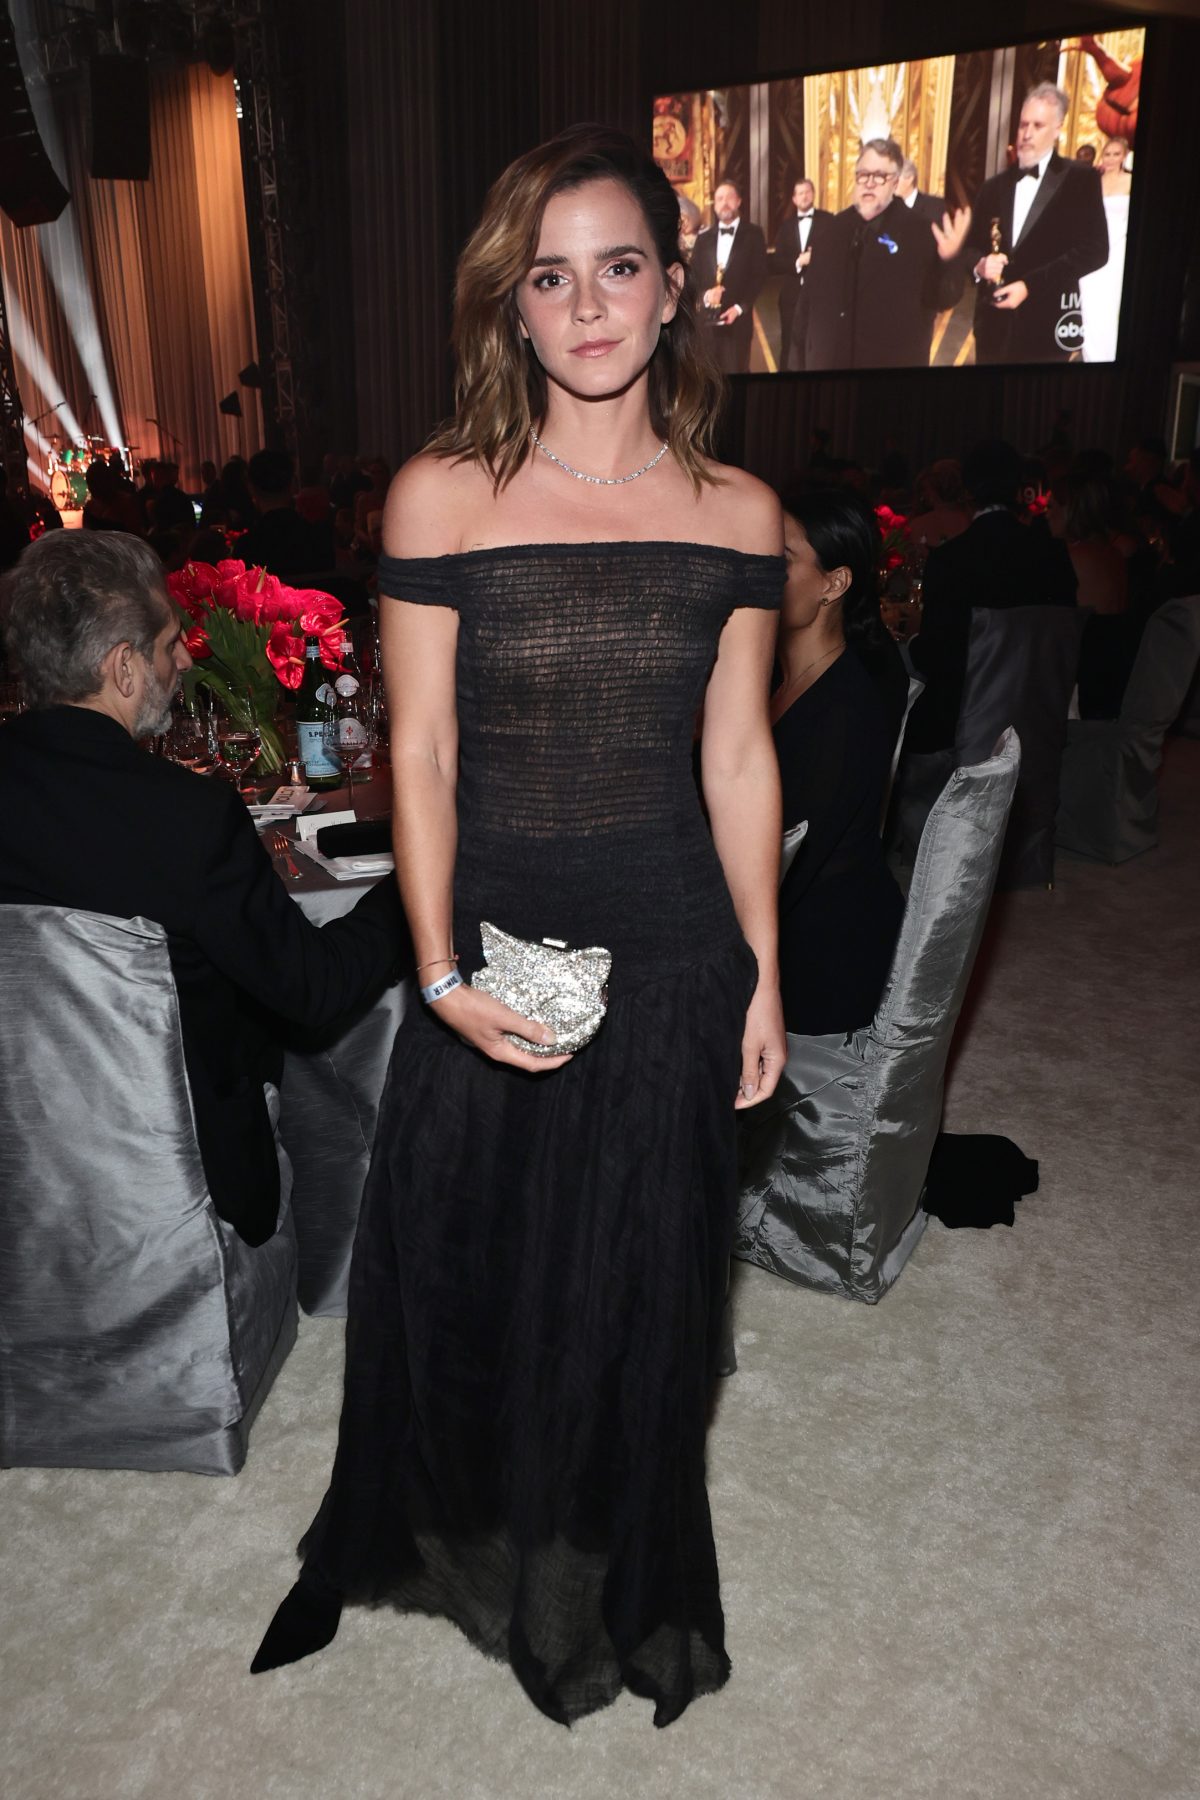 Emma Watson's Best Style Moments Over The Years